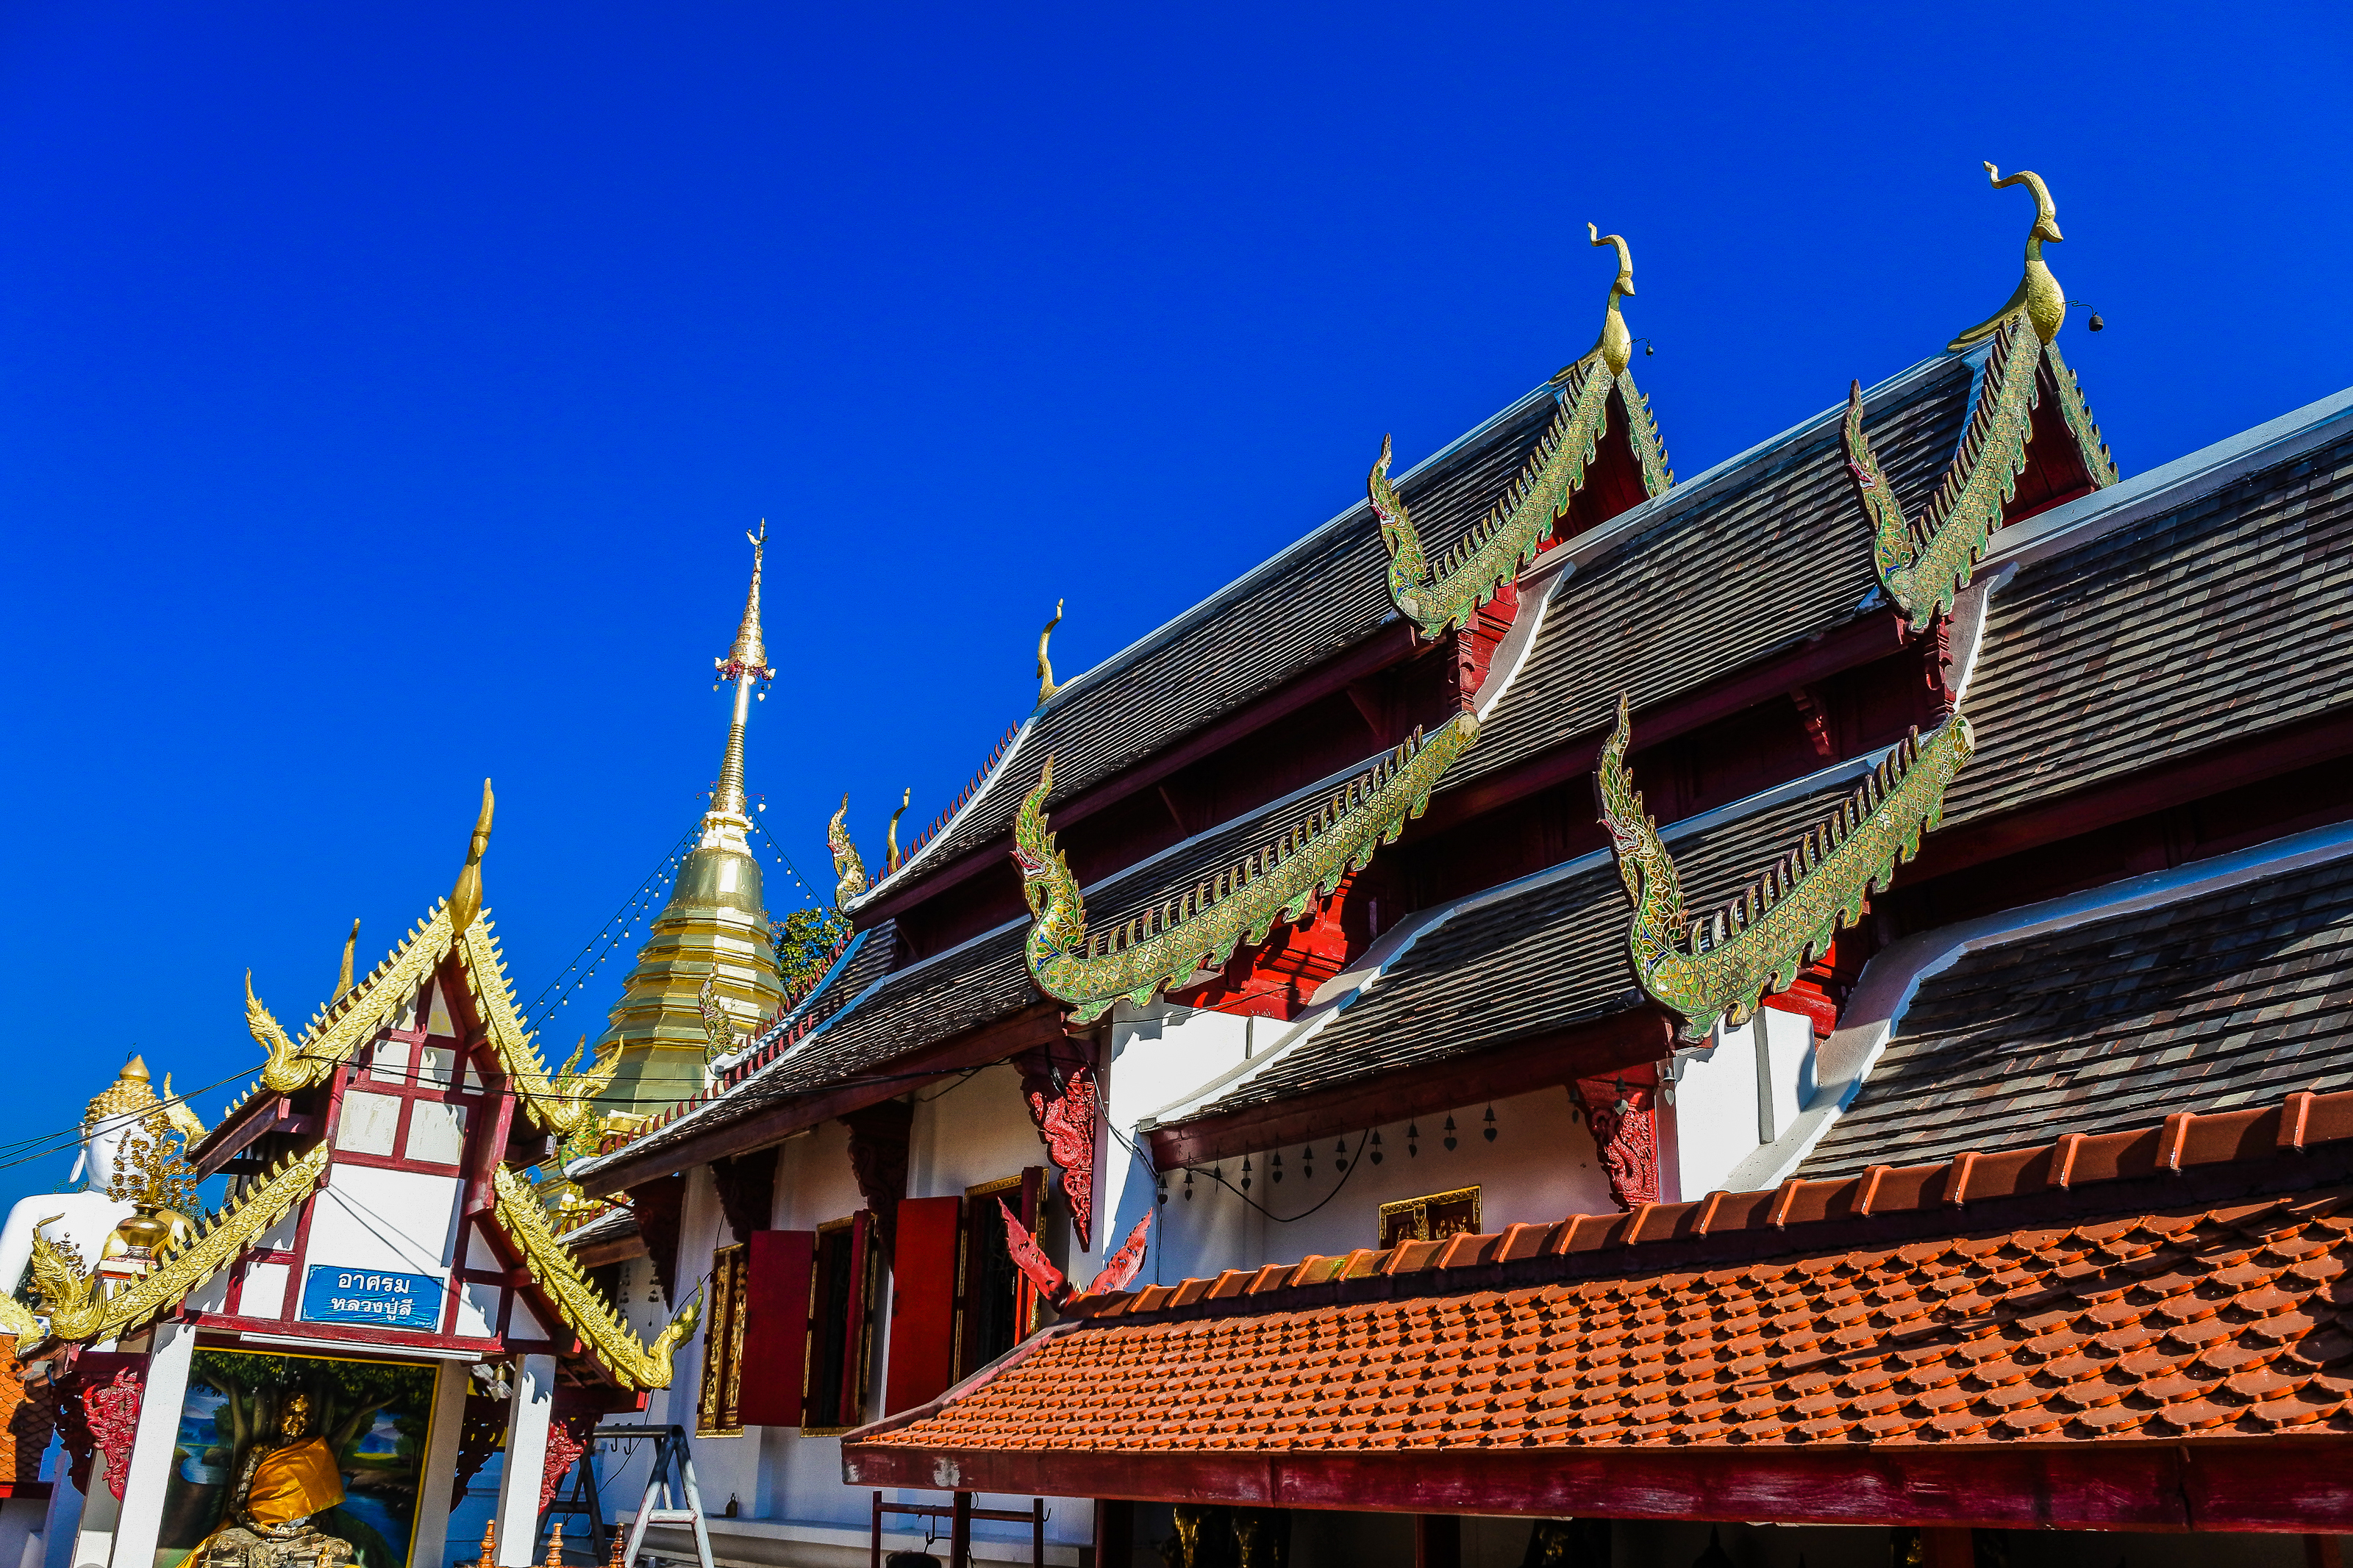 3200x2133 Free Images : symbol, building, cloud, beautiful, white, buddha, temple of the golden mountain, thailand, yunnan, landmark, sky, image, old, temples, bangkok, thai, brown, ancient, stupa, traditional, background, peace, tibetan, religious, city